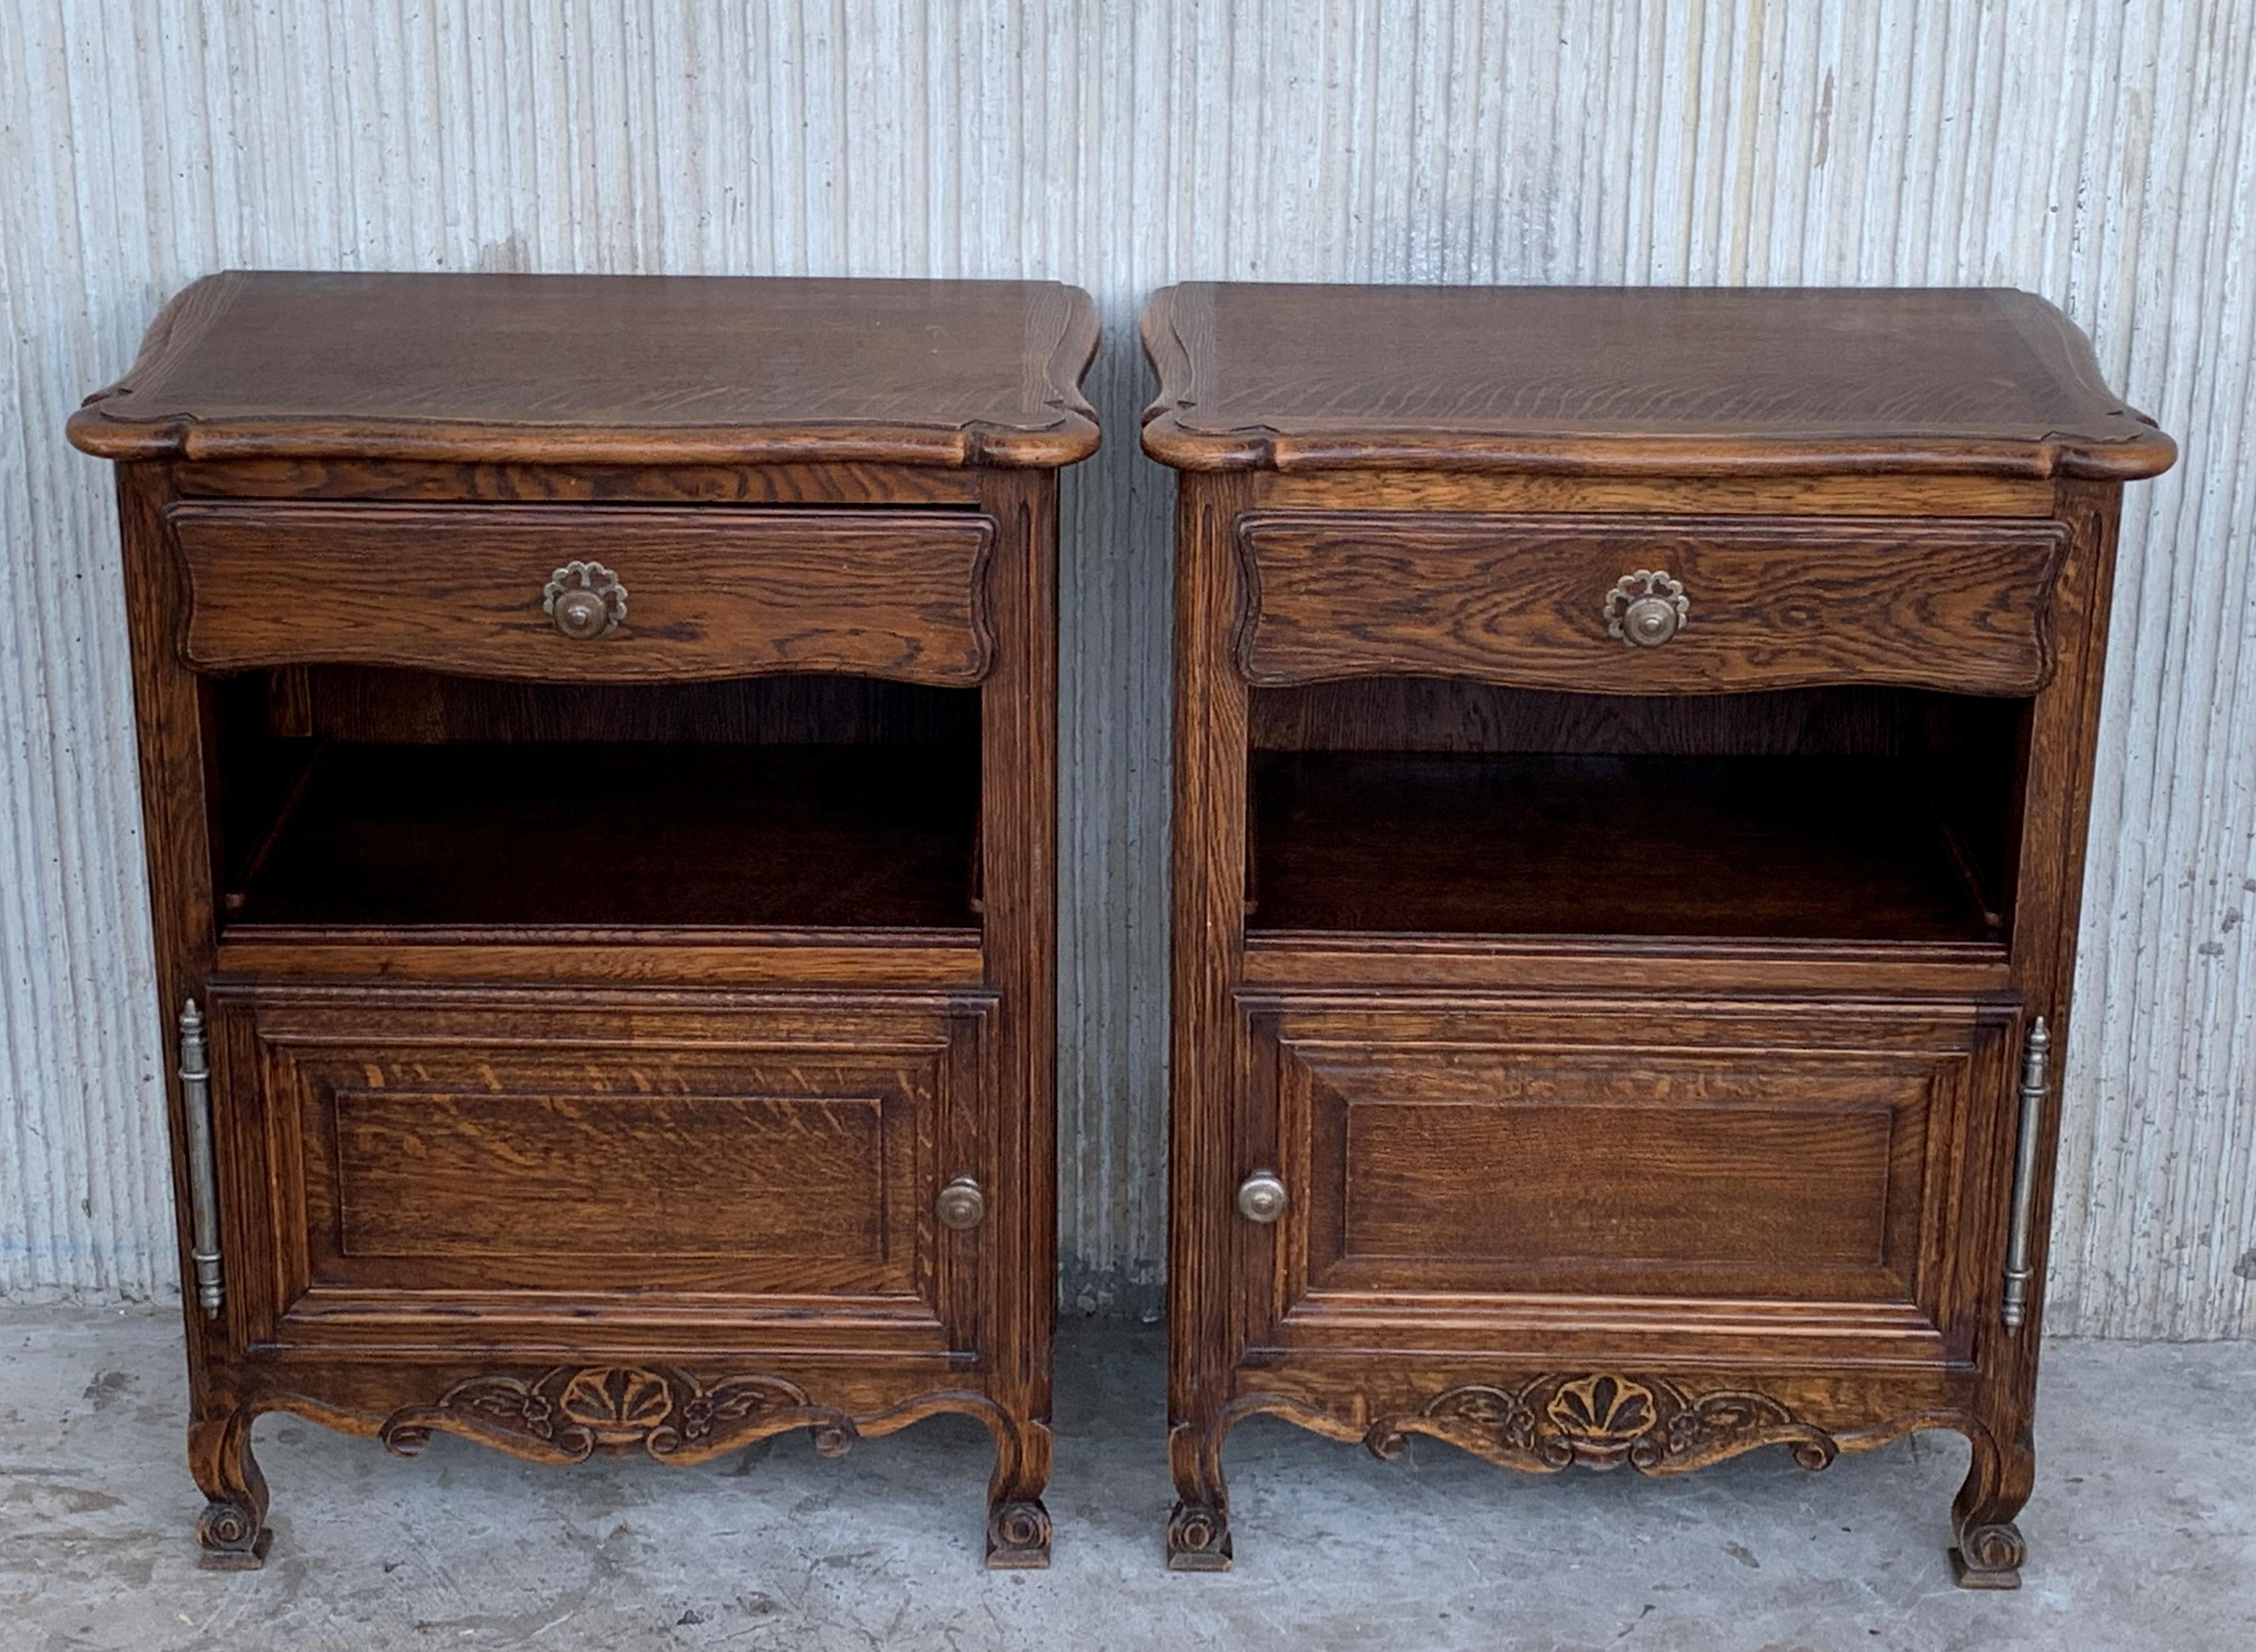 20th century pair of Catalan, Spanish nightstands with low carveds, drawer, open shelf and door in the low space for an extra storage
Beautiful and heavy nightstands with drawer.

Measures: Height to the open shelf 16.33in.
 